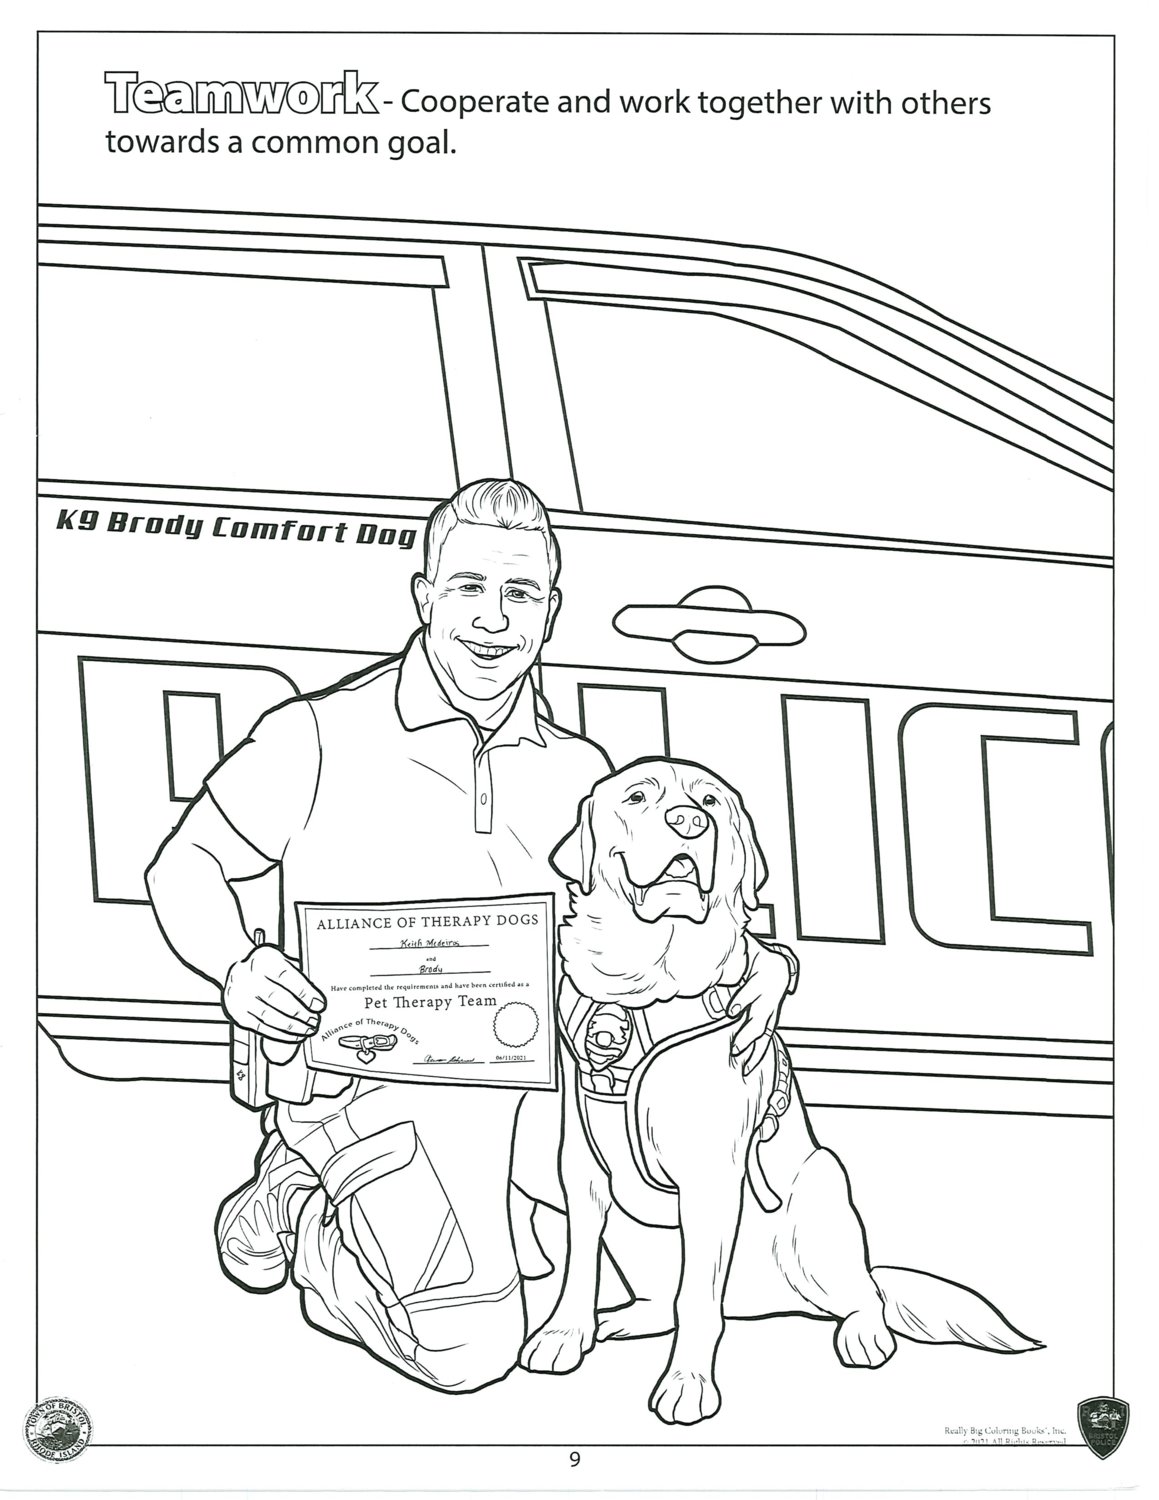 School Resource Officer Keith Medeiros is featured inside the book alongside his friendly, furry partner, Brody.